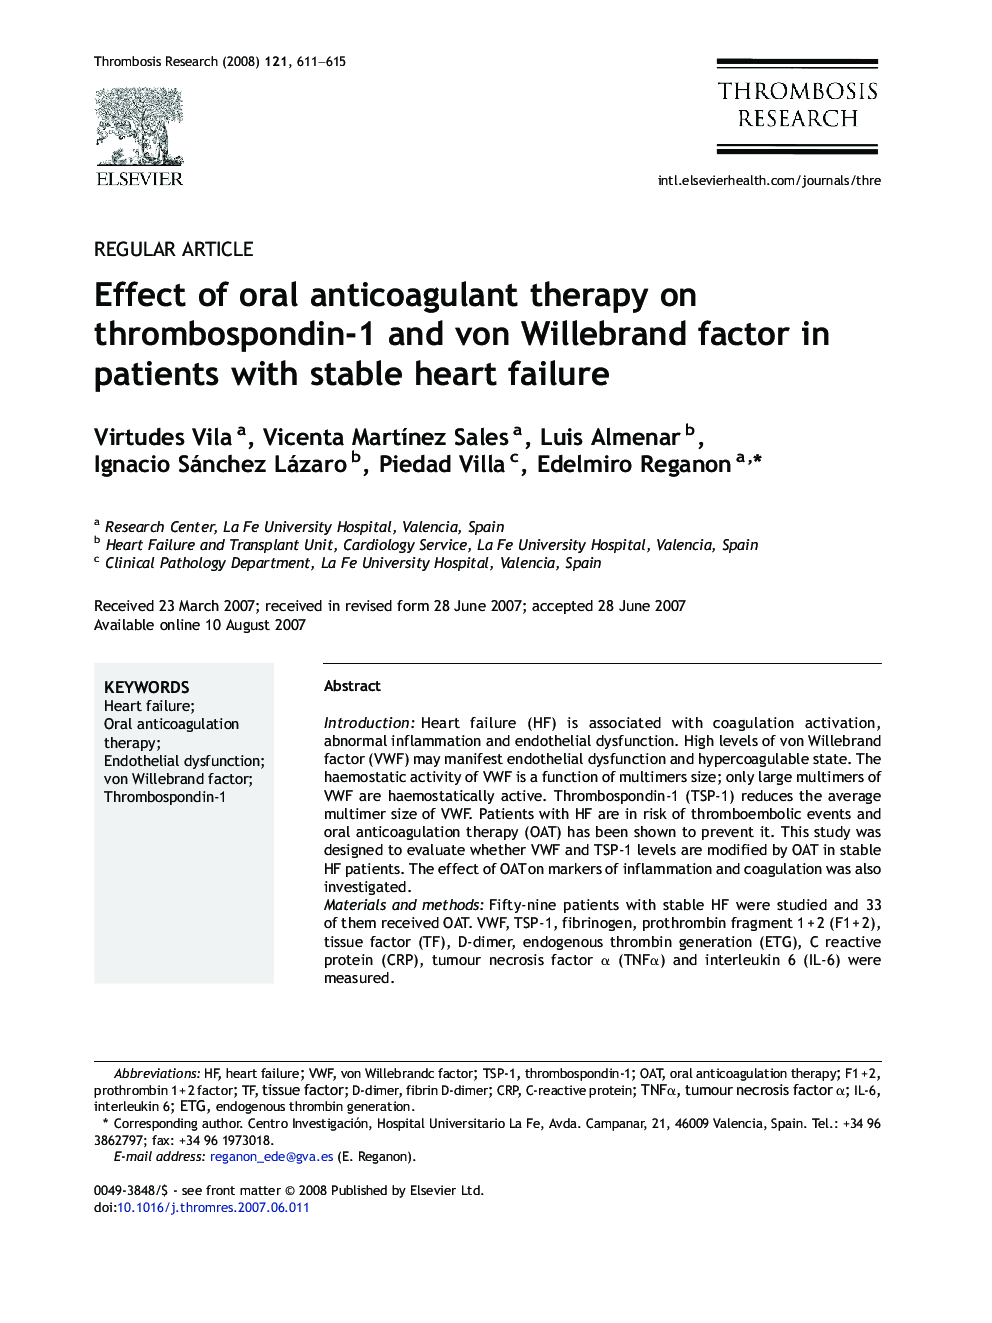 Effect of oral anticoagulant therapy on thrombospondin-1 and von Willebrand factor in patients with stable heart failure